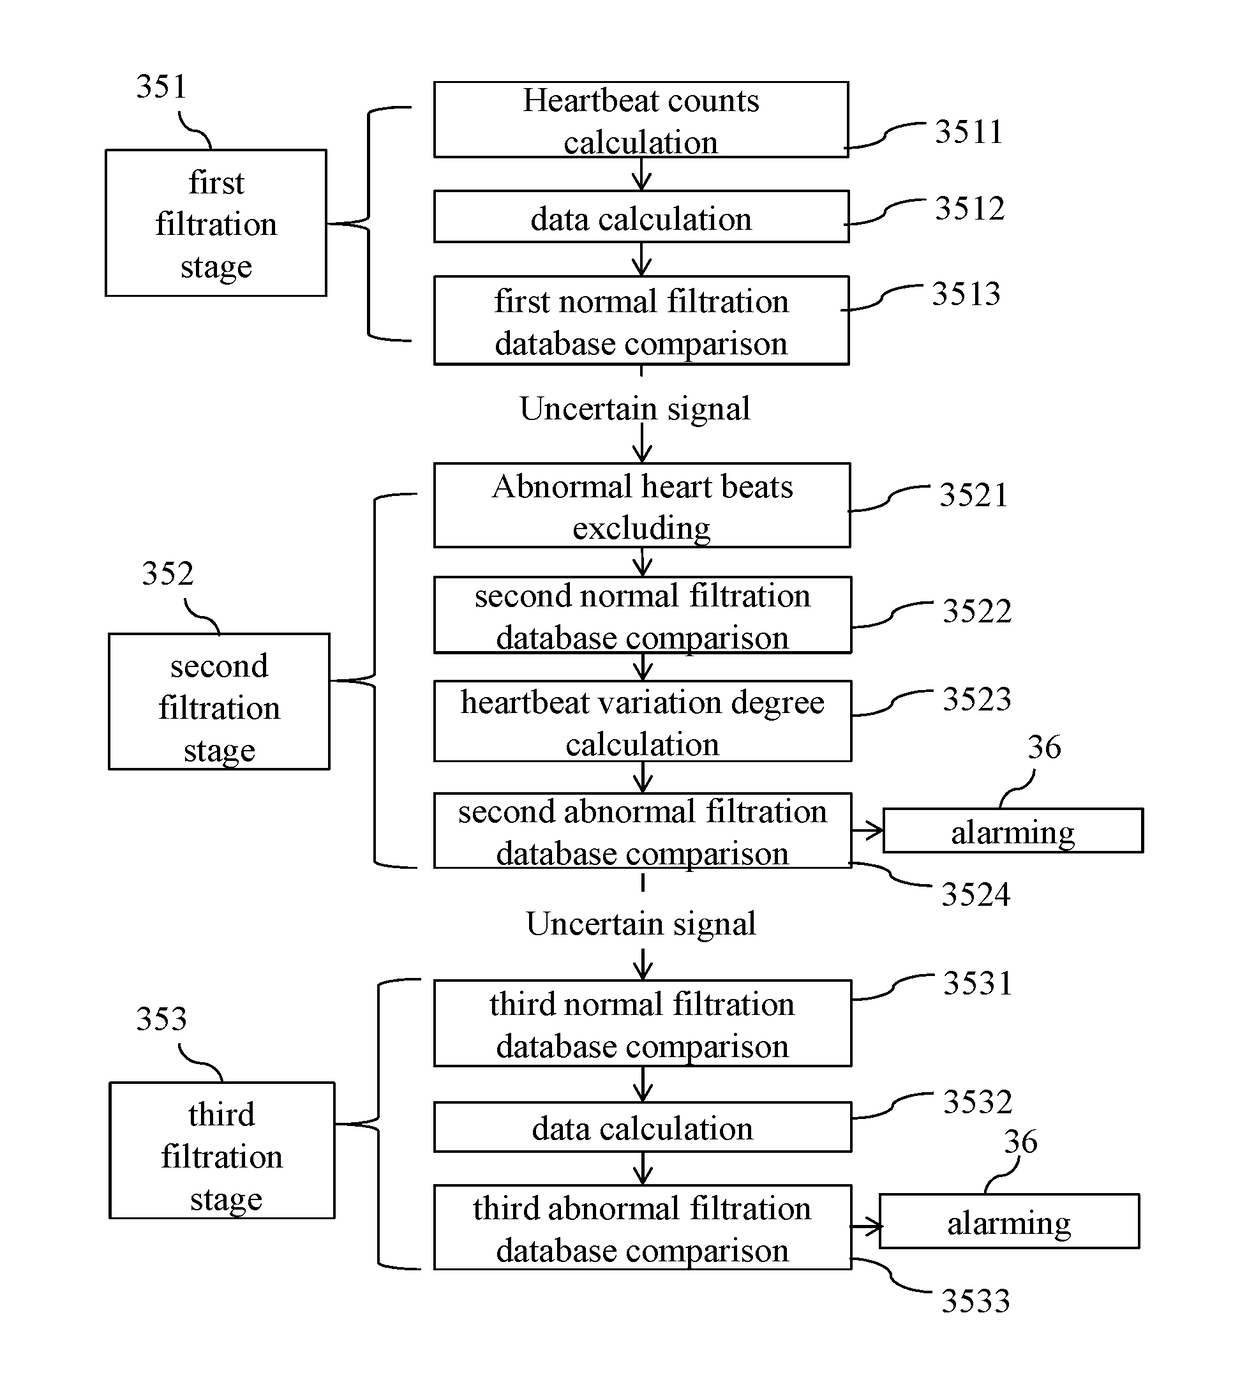 Wearable device which diagnosis personal cardiac health condition by monitoring and analyzing heartbeat and the method thereof